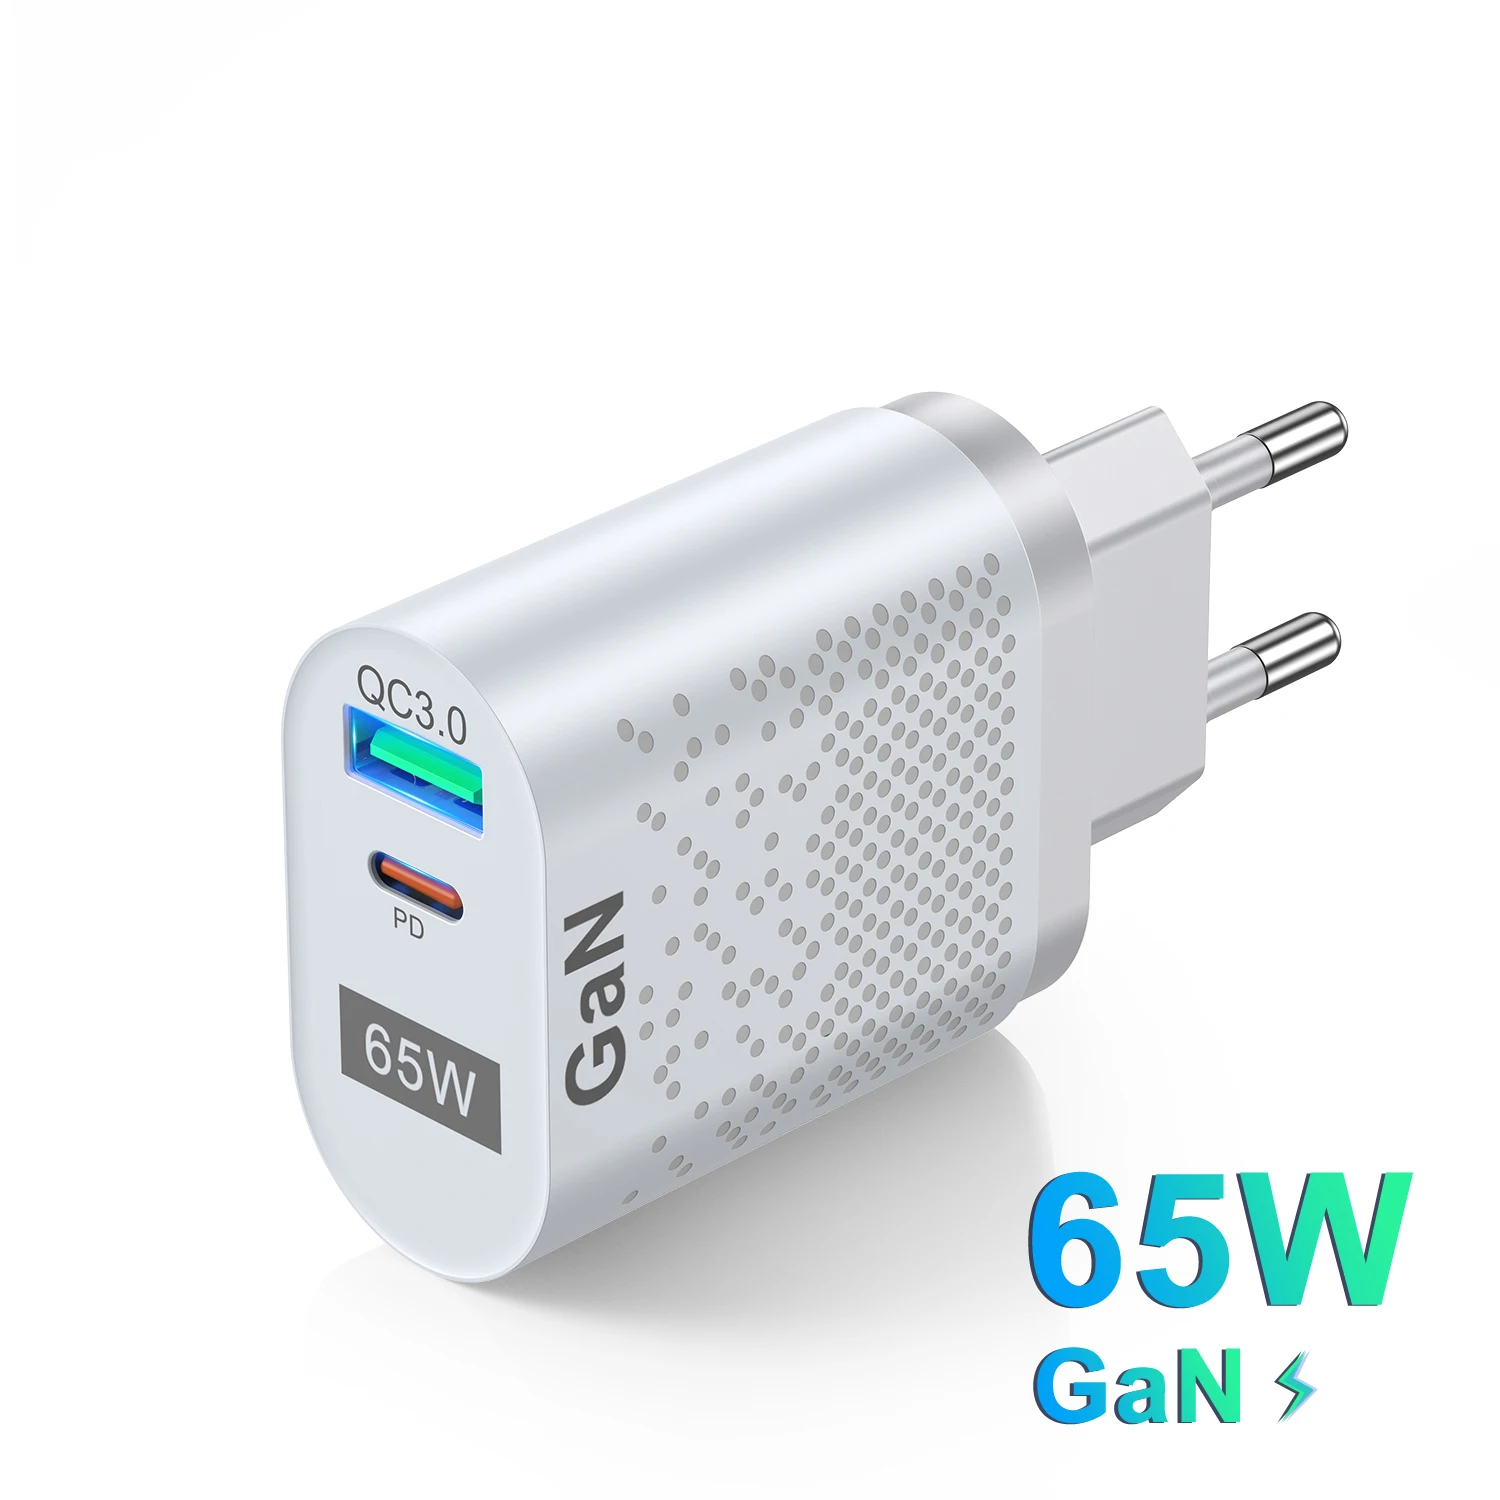 65W Gallium Nitride USB Charger PD Smart Fast Charging Cell Phone Charging Head QC3.0 Laptop Universal Quick Gan Charging Source